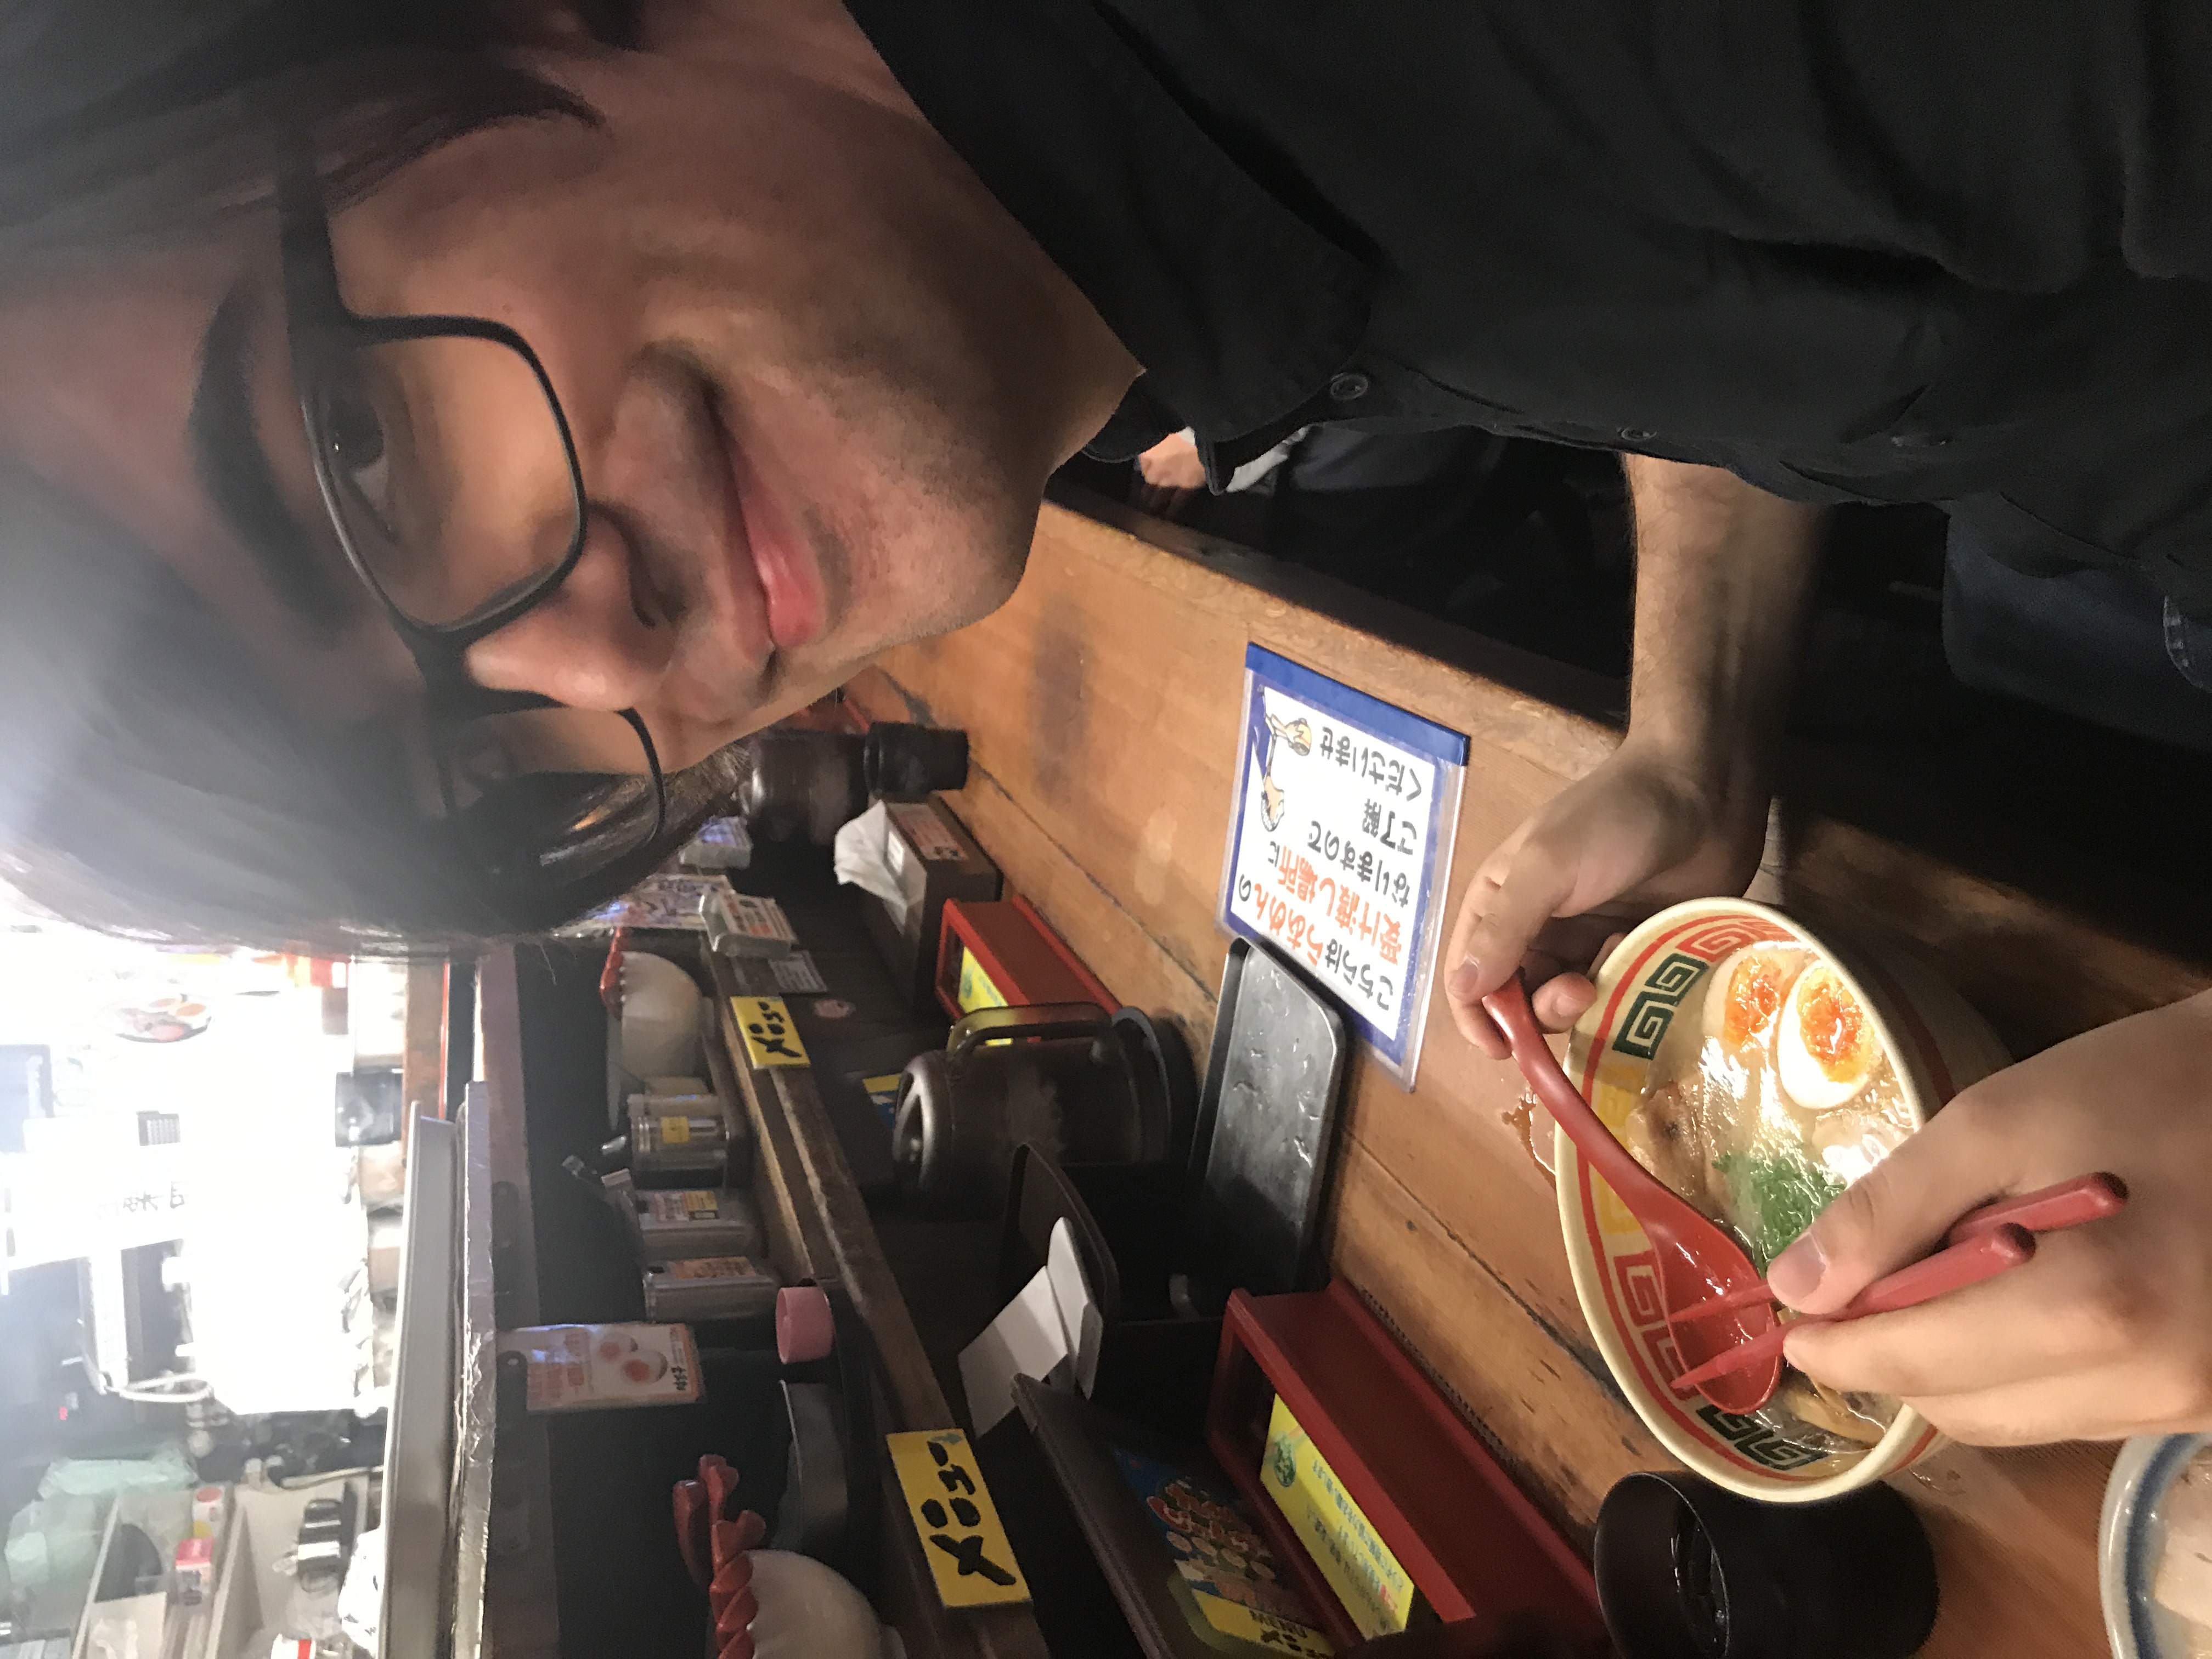 Here's a random photo of me eating ramen during our last trip to Japan.